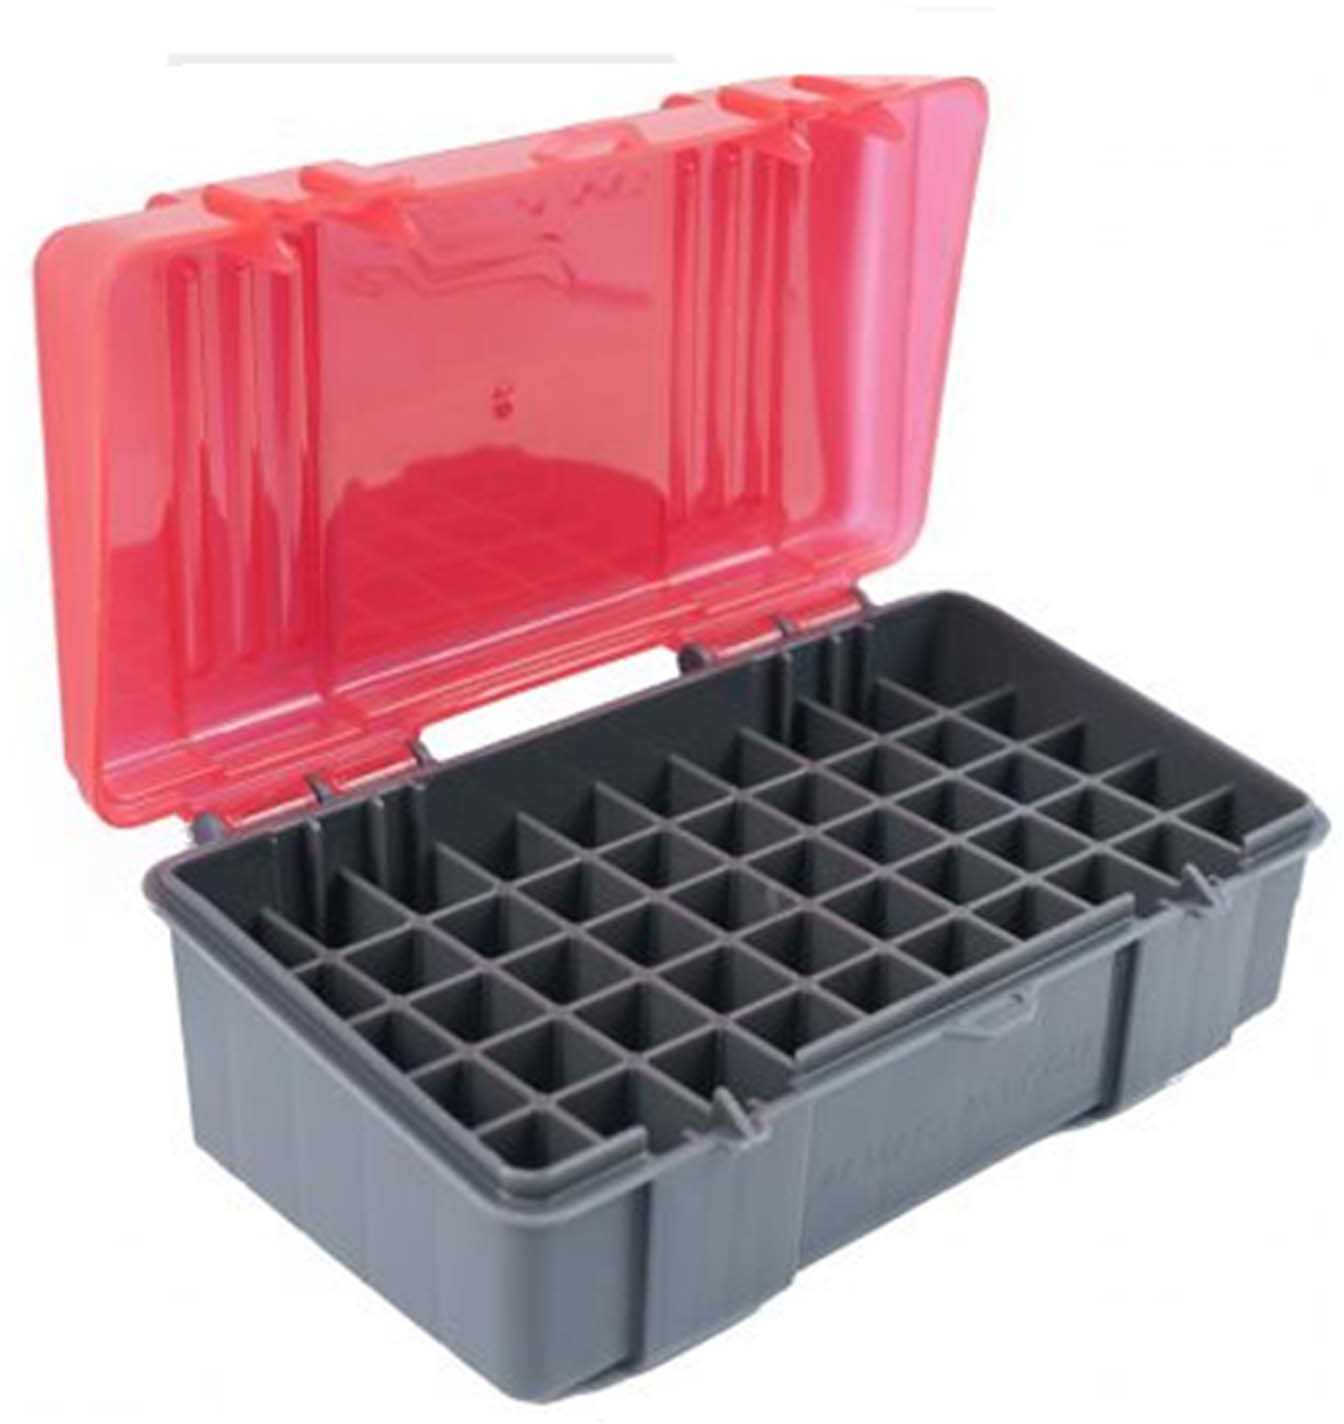 Plano Ammunition Box Holds 50 Rounds of .41 Mag/.44 Mag/.45 LC Handgun Charcoal/Rose 6 Pack 1226-50